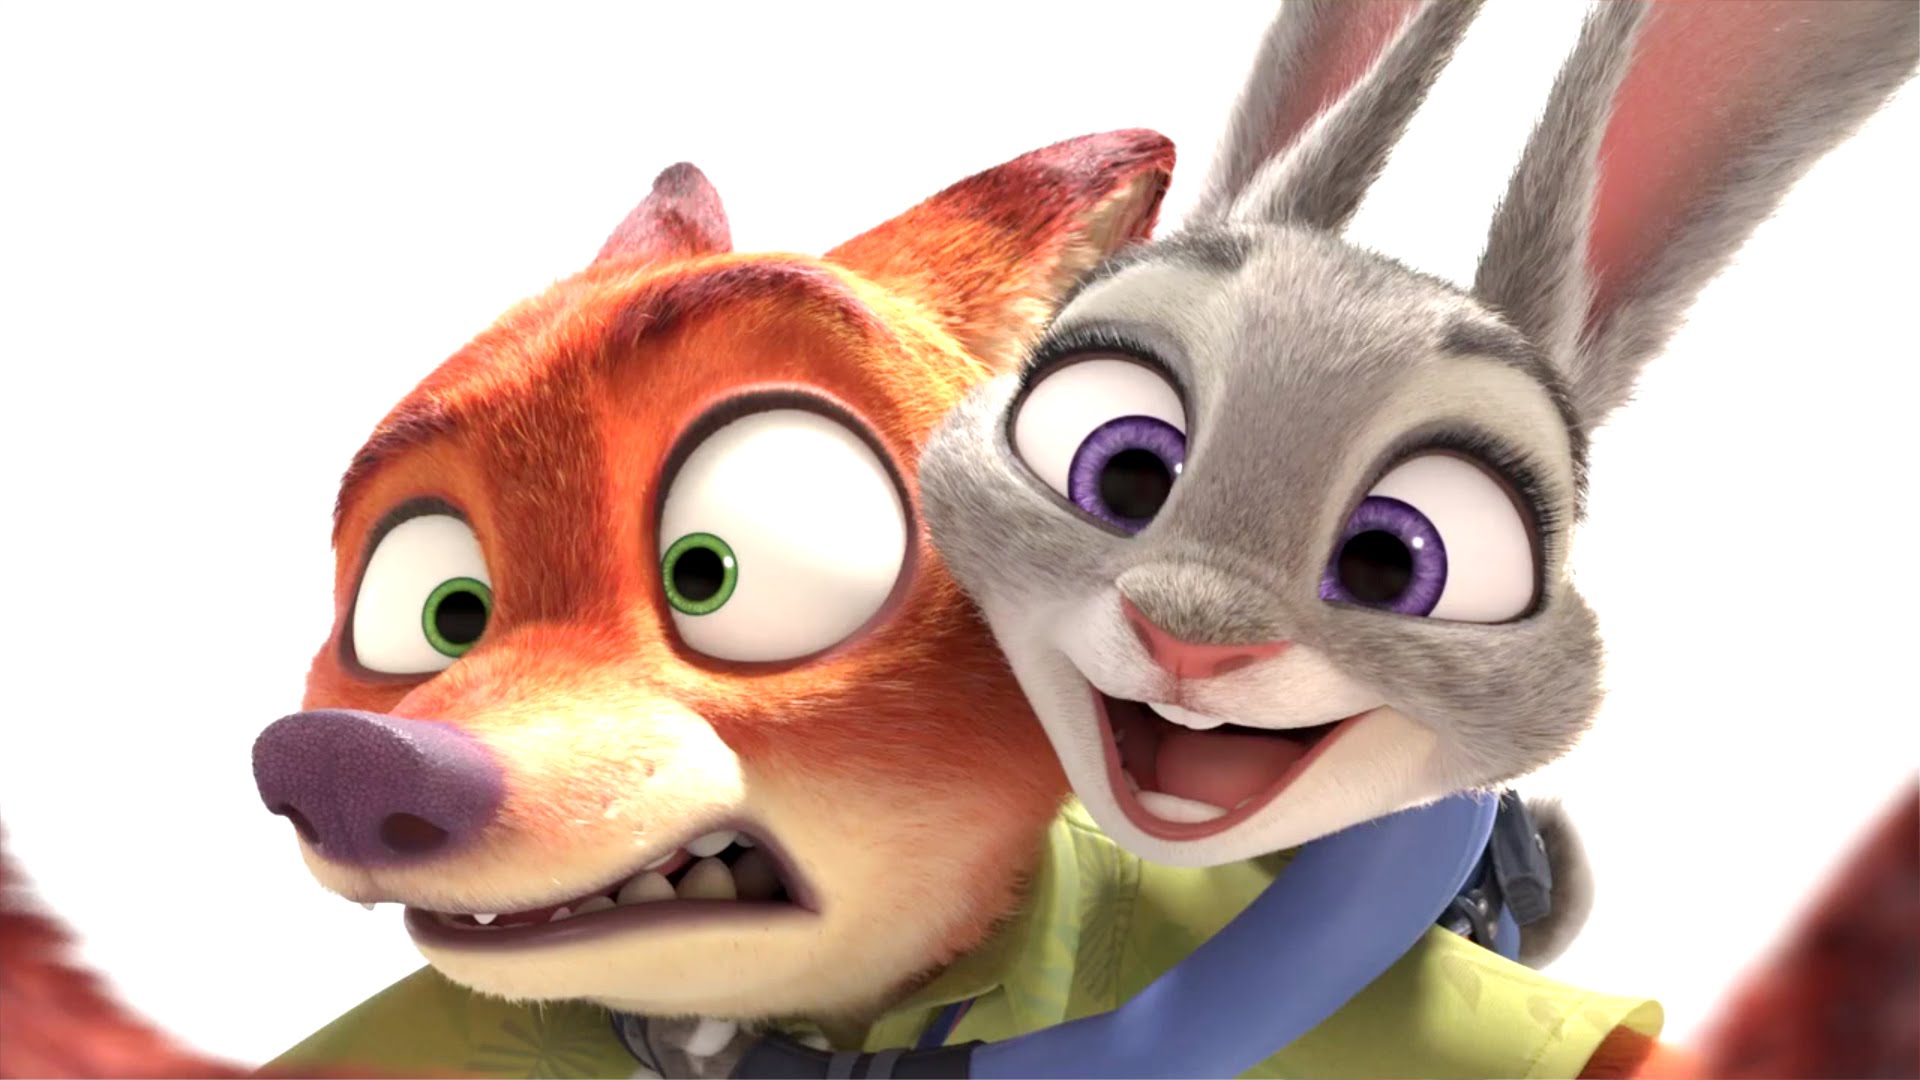  Zootopia images Zootopia Wallpaper HD wallpaper and background photos